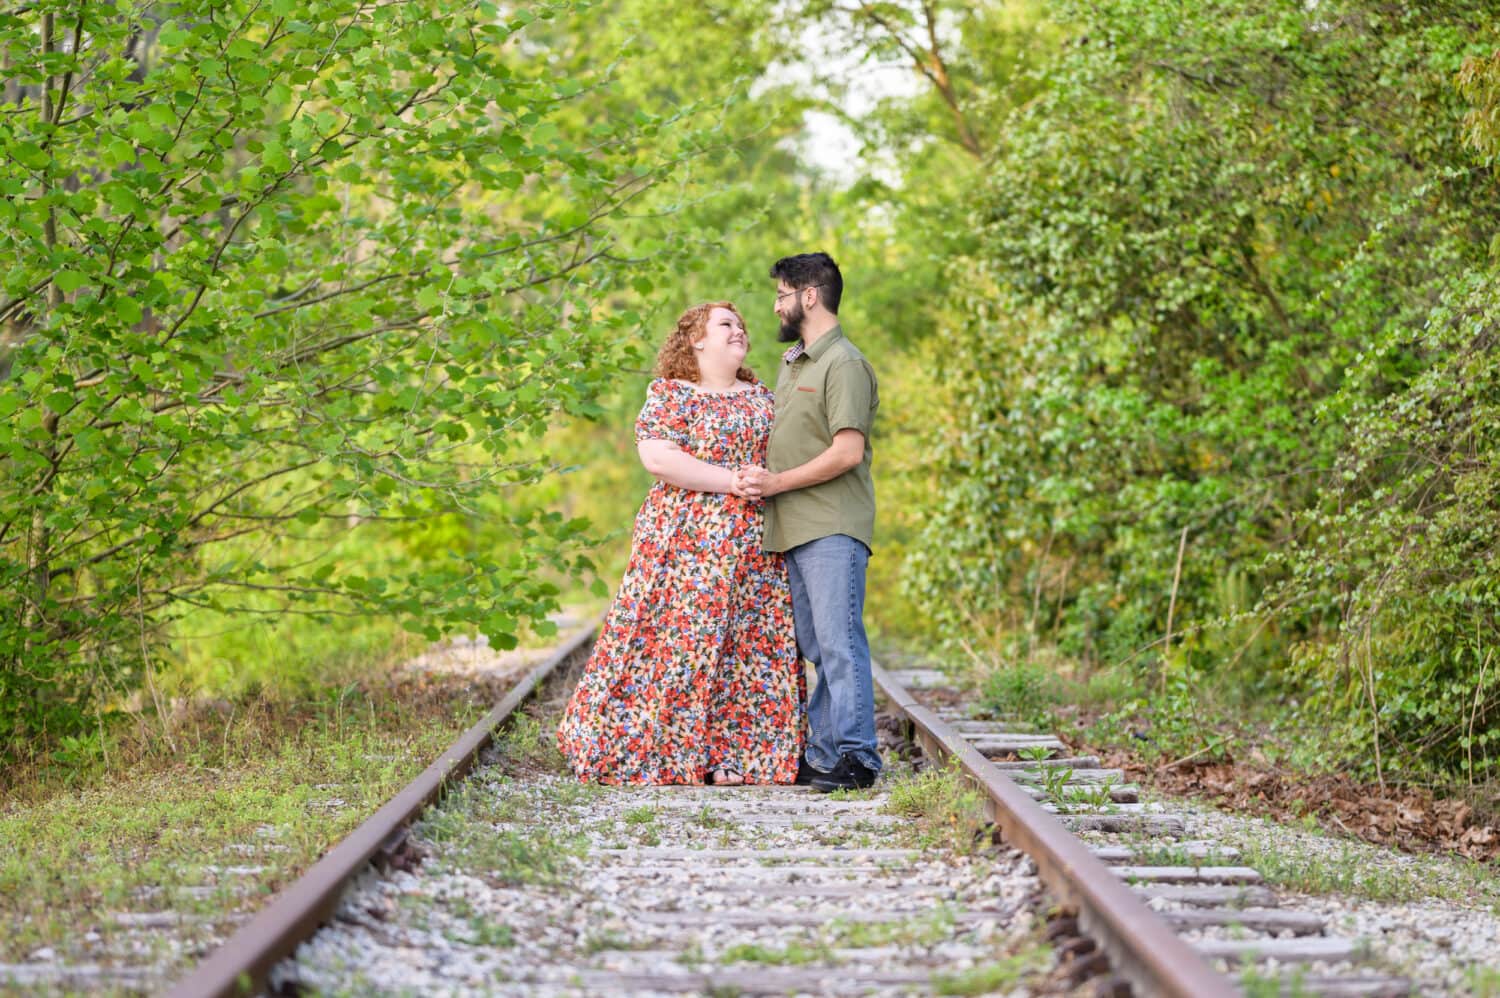 Pictures on the train tracks -